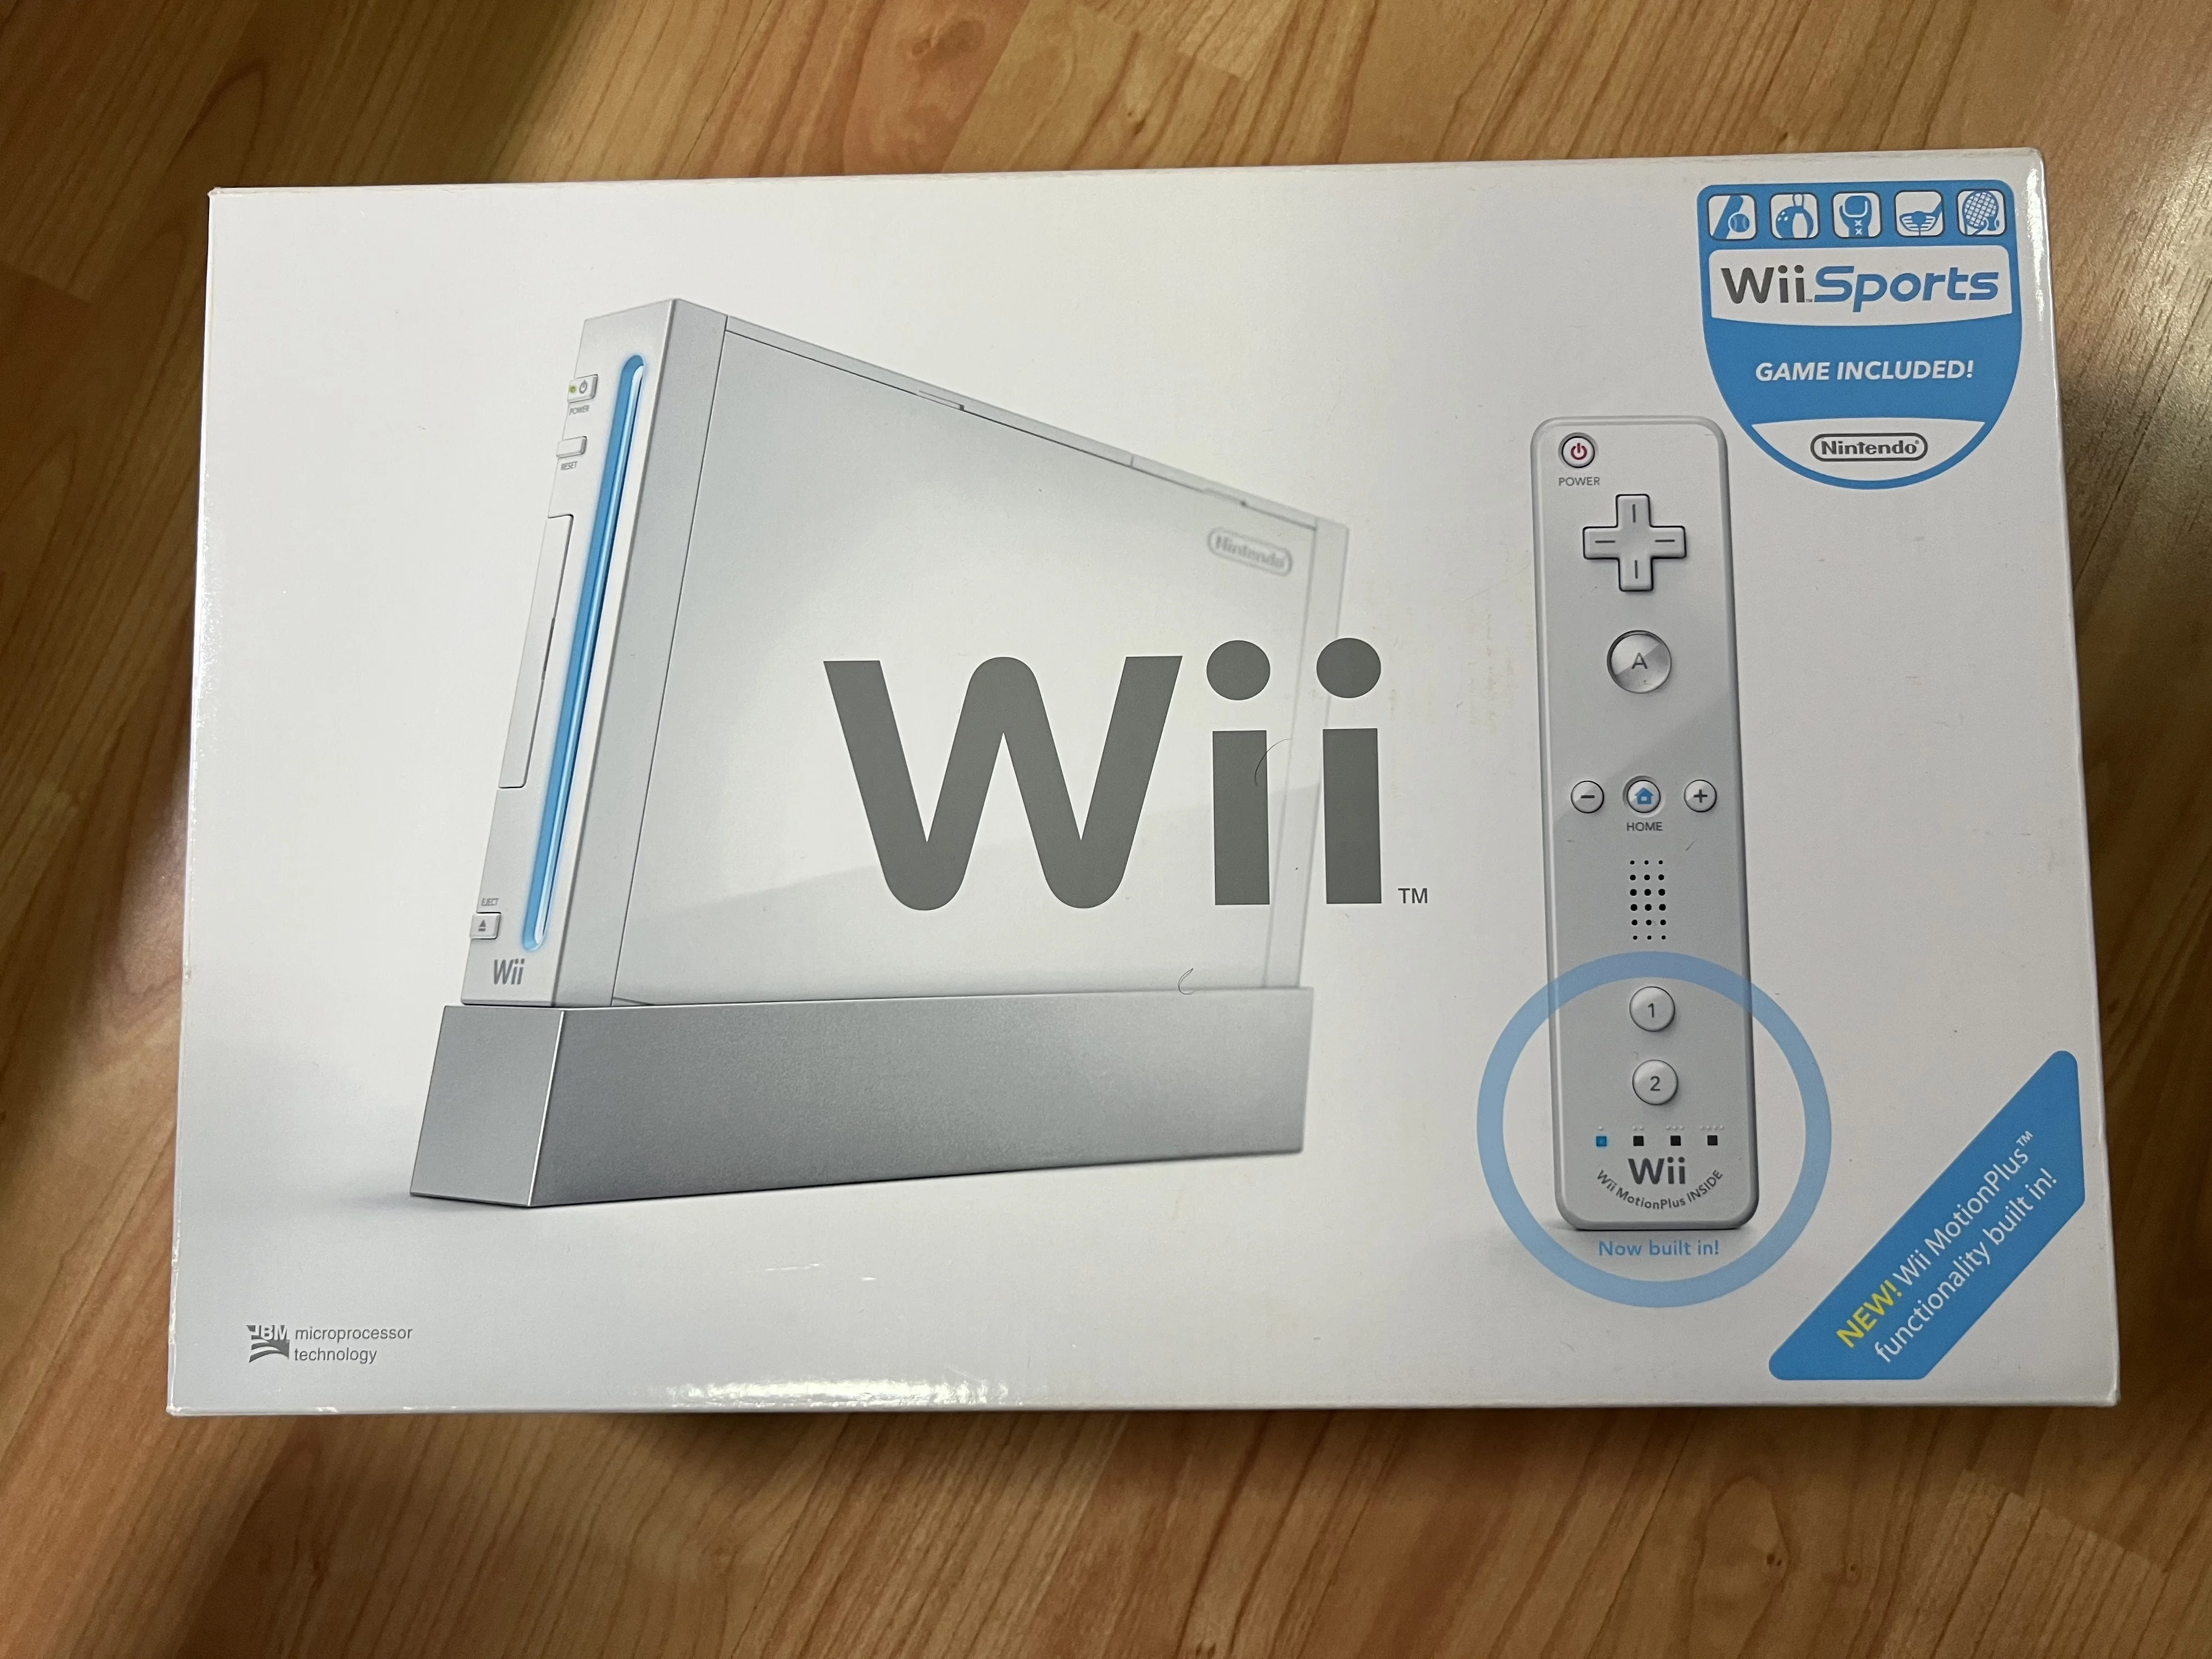  Nintendo Wii White Console + Wii Motion Plus + Wii Sports [SG]